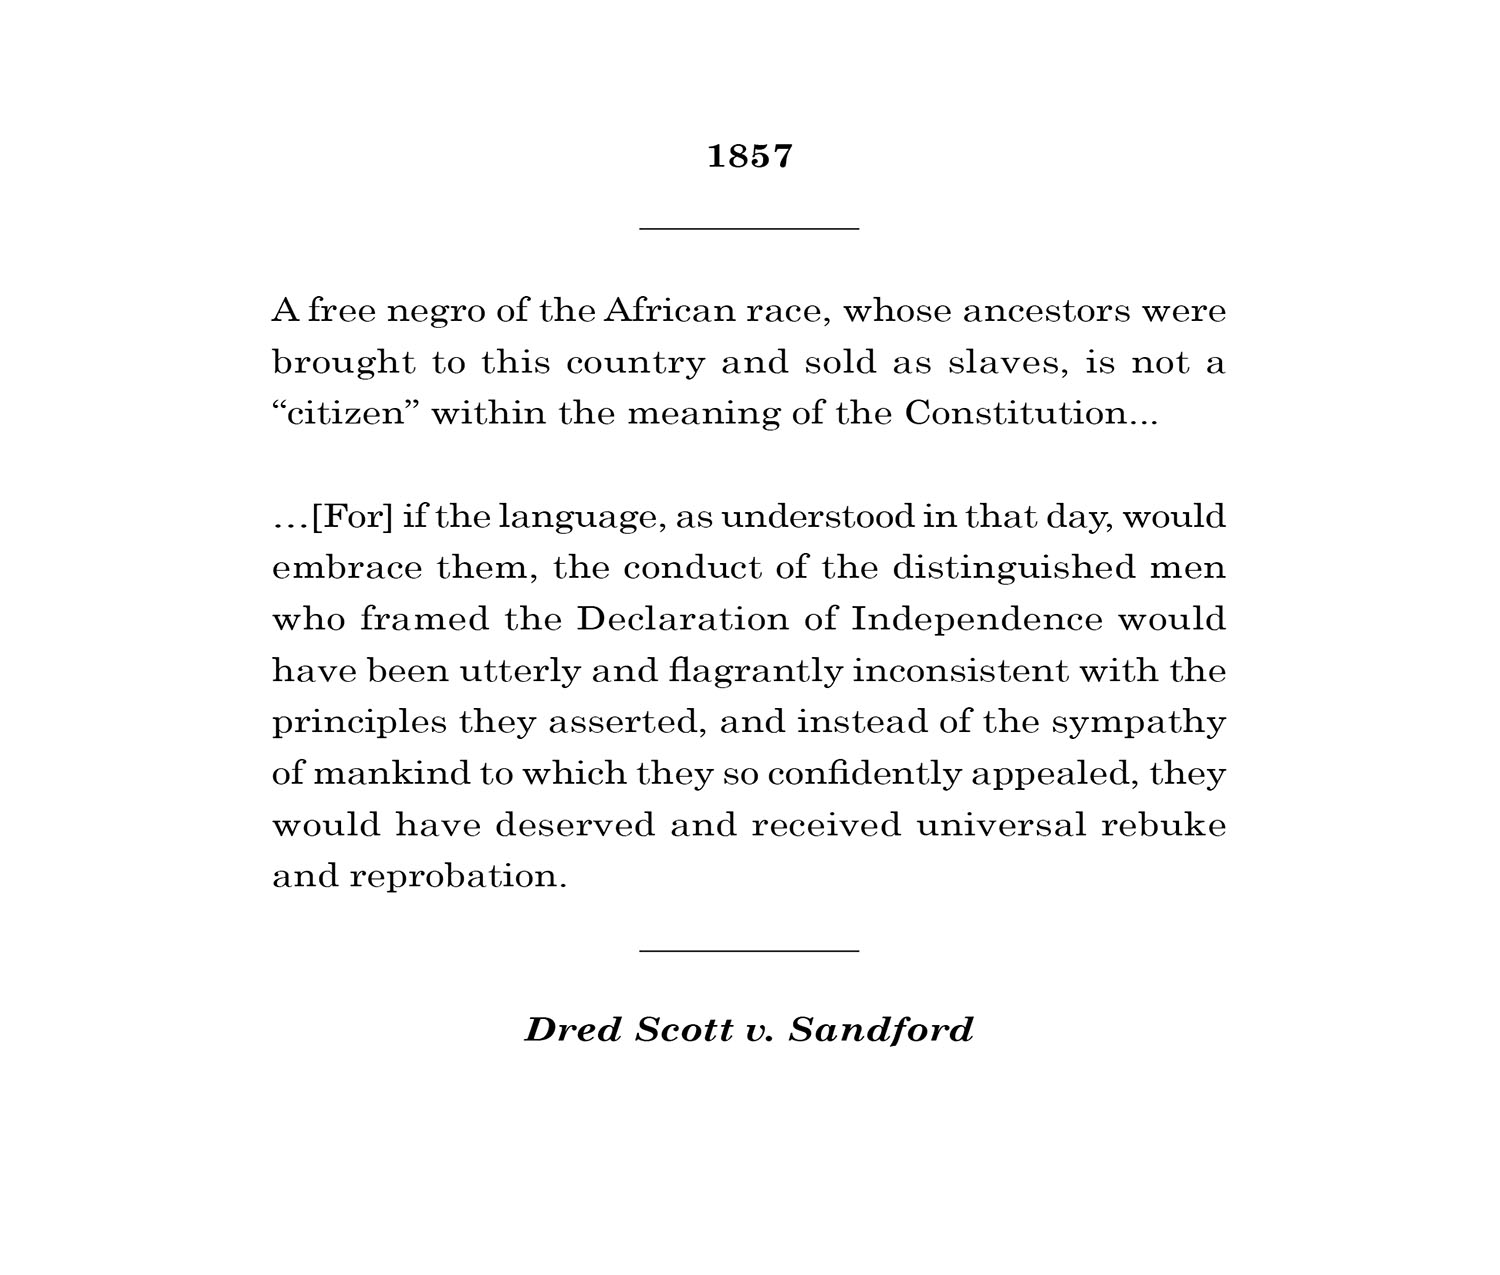 <p>A free negro of the African race, whose ancestors were brought to this country and sold as slaves, is not a “citizen” within the meaning of the Constitution...[For] if the language, as understood in that day, would embrace them, the conduct of the distinguished men who framed the Declaration of Independence would have been utterly and flagrantly inconsistent with the principles they asserted, and instead of the sympathy of mankind to which they so confidently appealed, they would have deserved and receiv